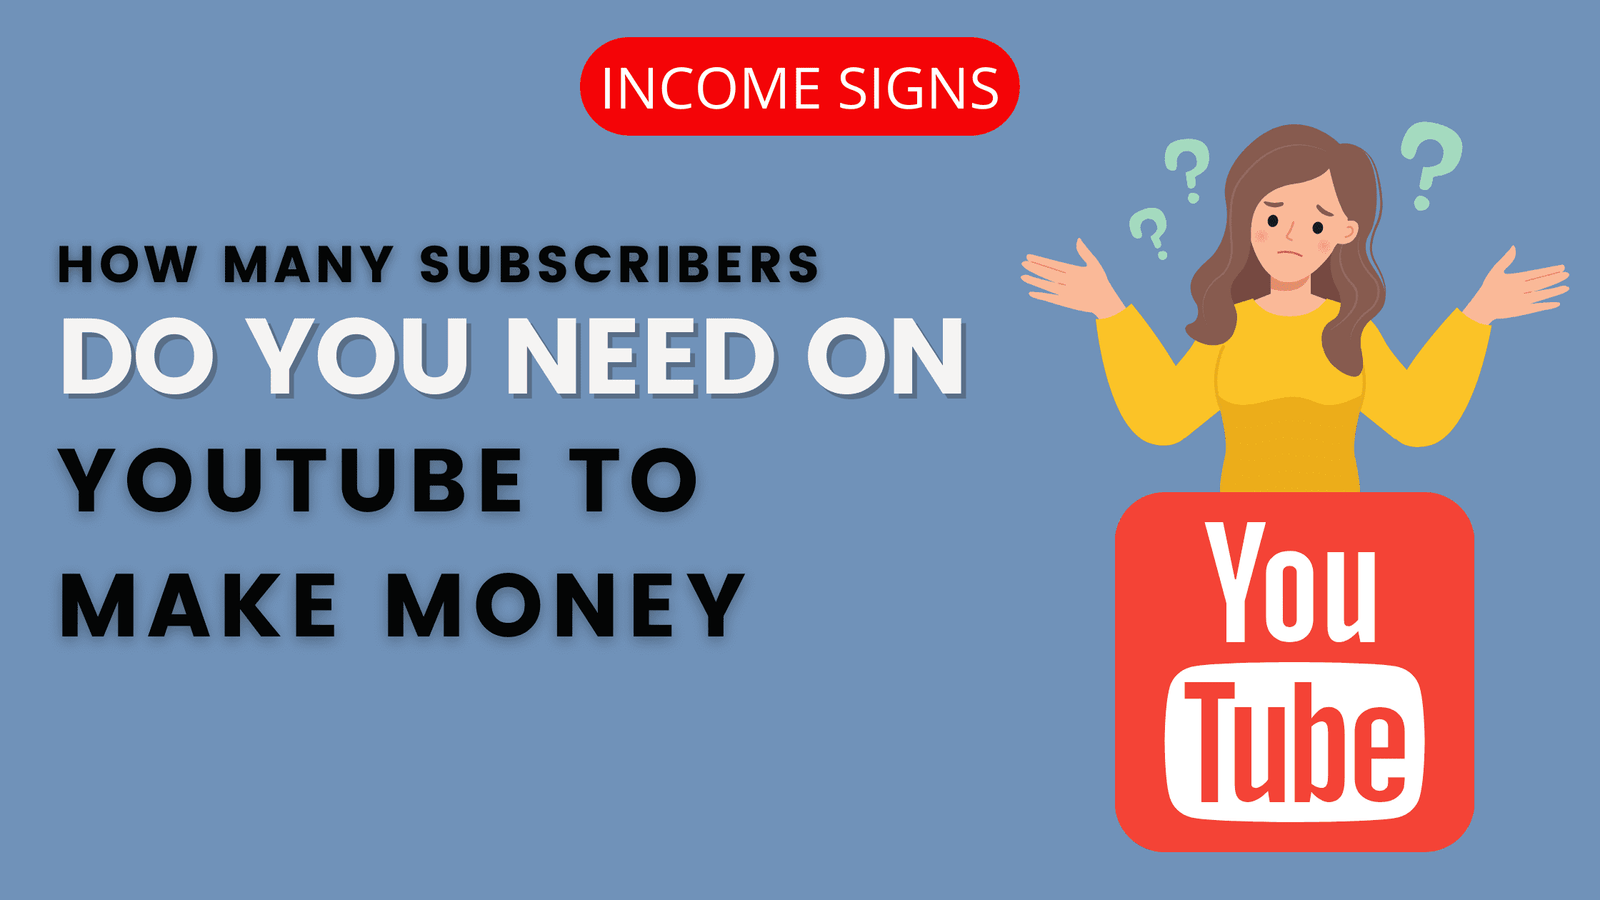 How Many Subscribers Do You Need on YouTube to Make Money?